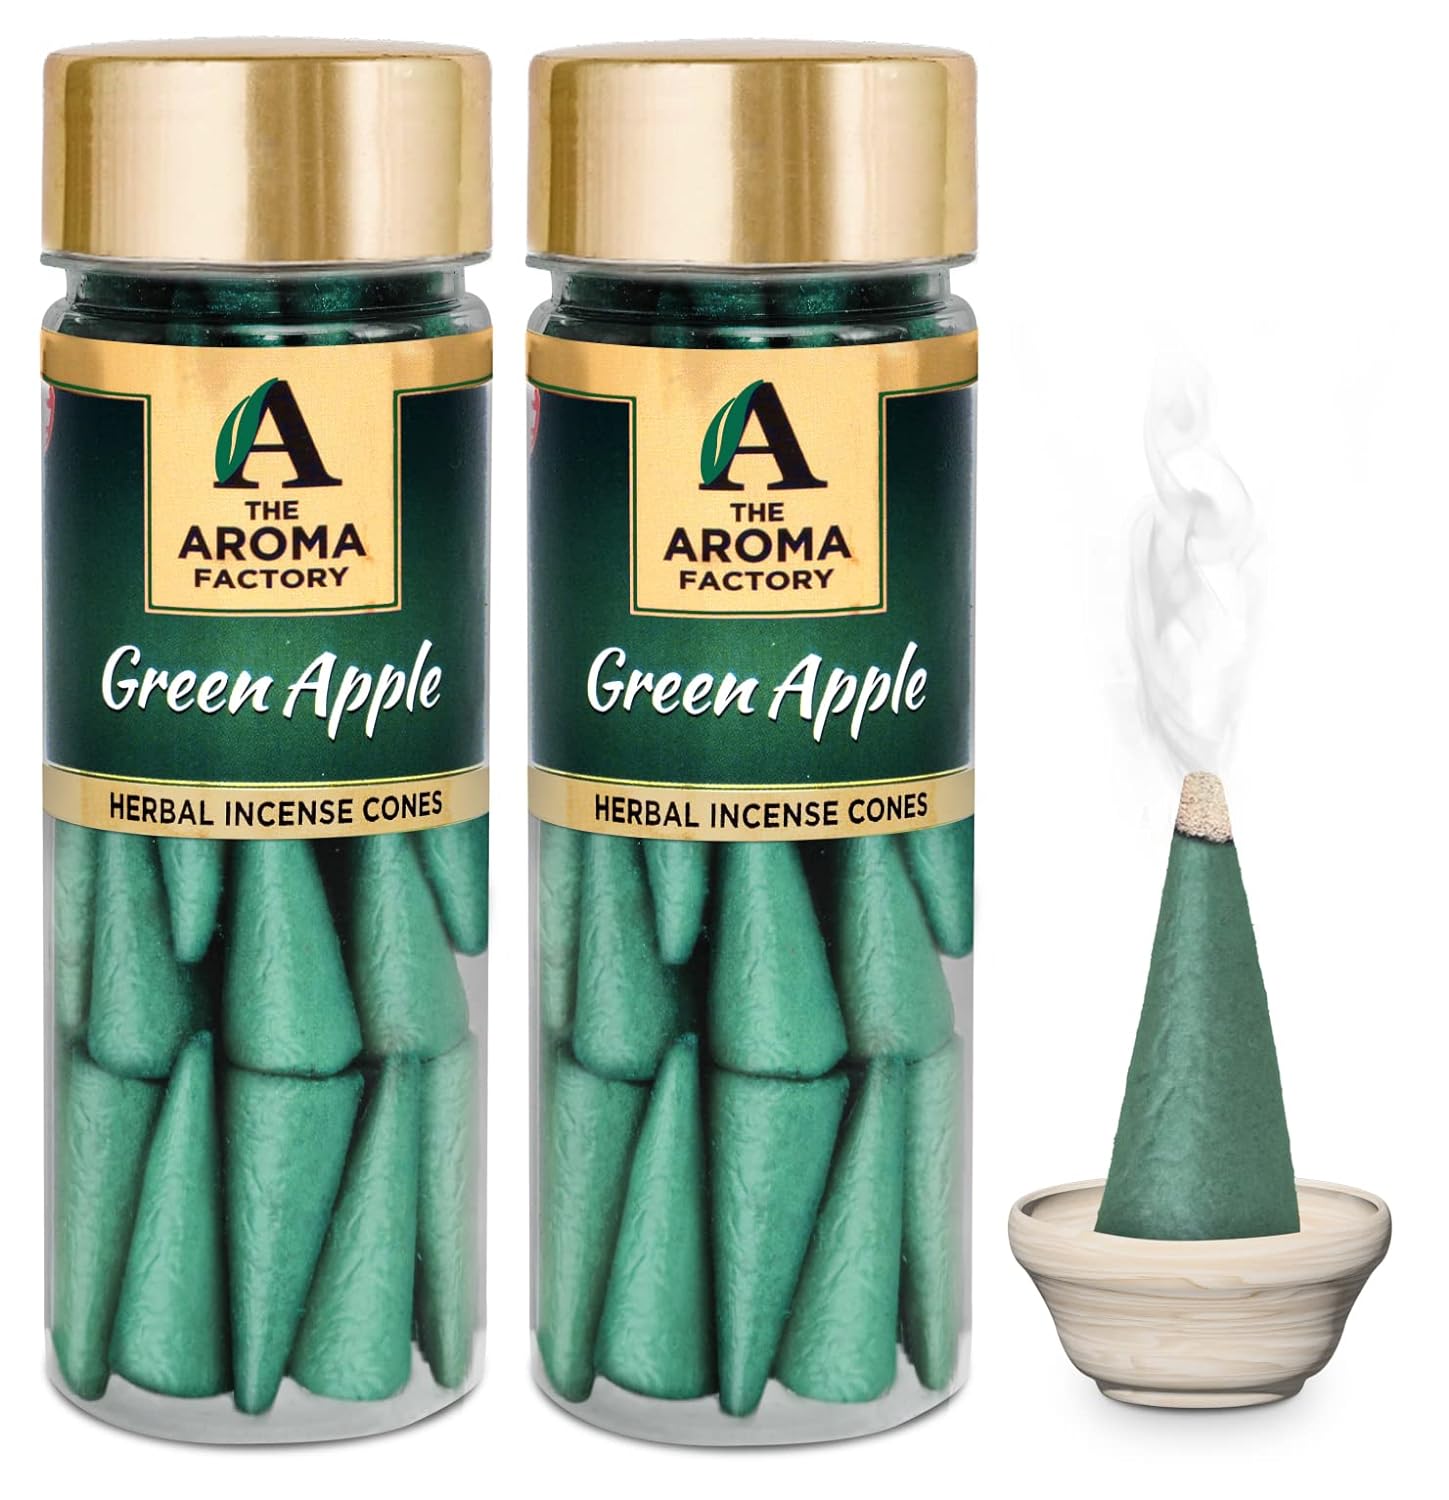 The Aroma Factory Incense Dhoop Cone for Pooja, Green Apple (100% Herbal & 0% Charcoal) 2 Bottles x 30 Cones